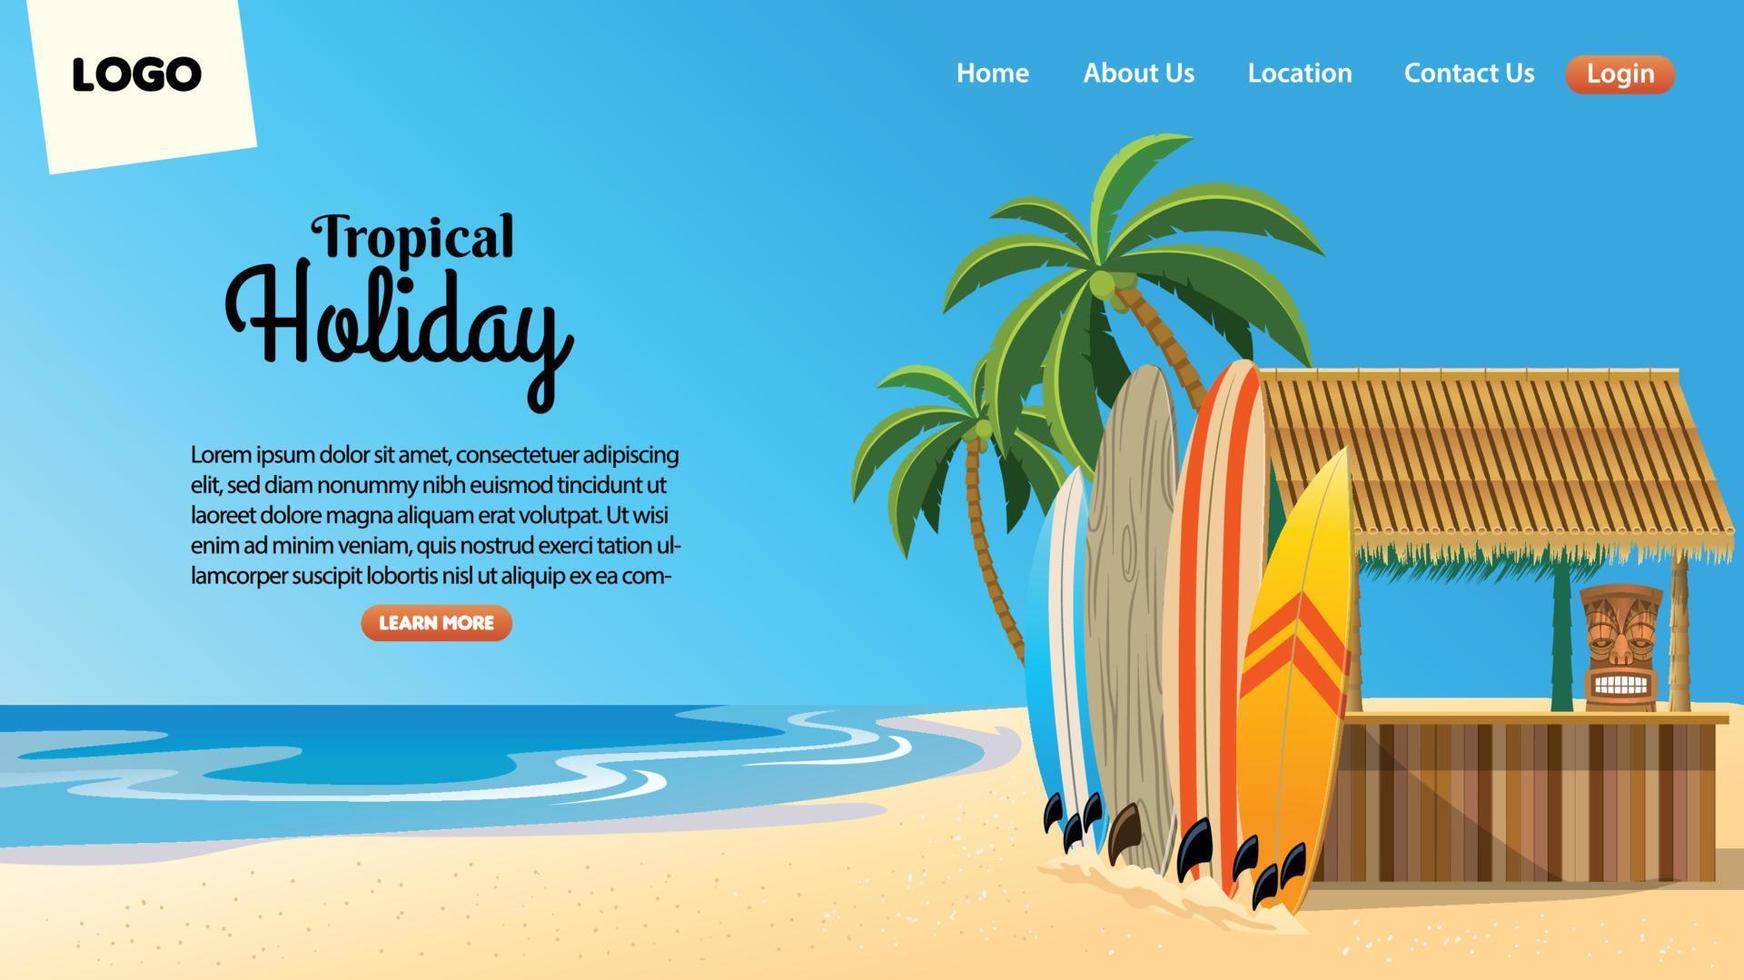 landing page design with tropical beach bar situation vector